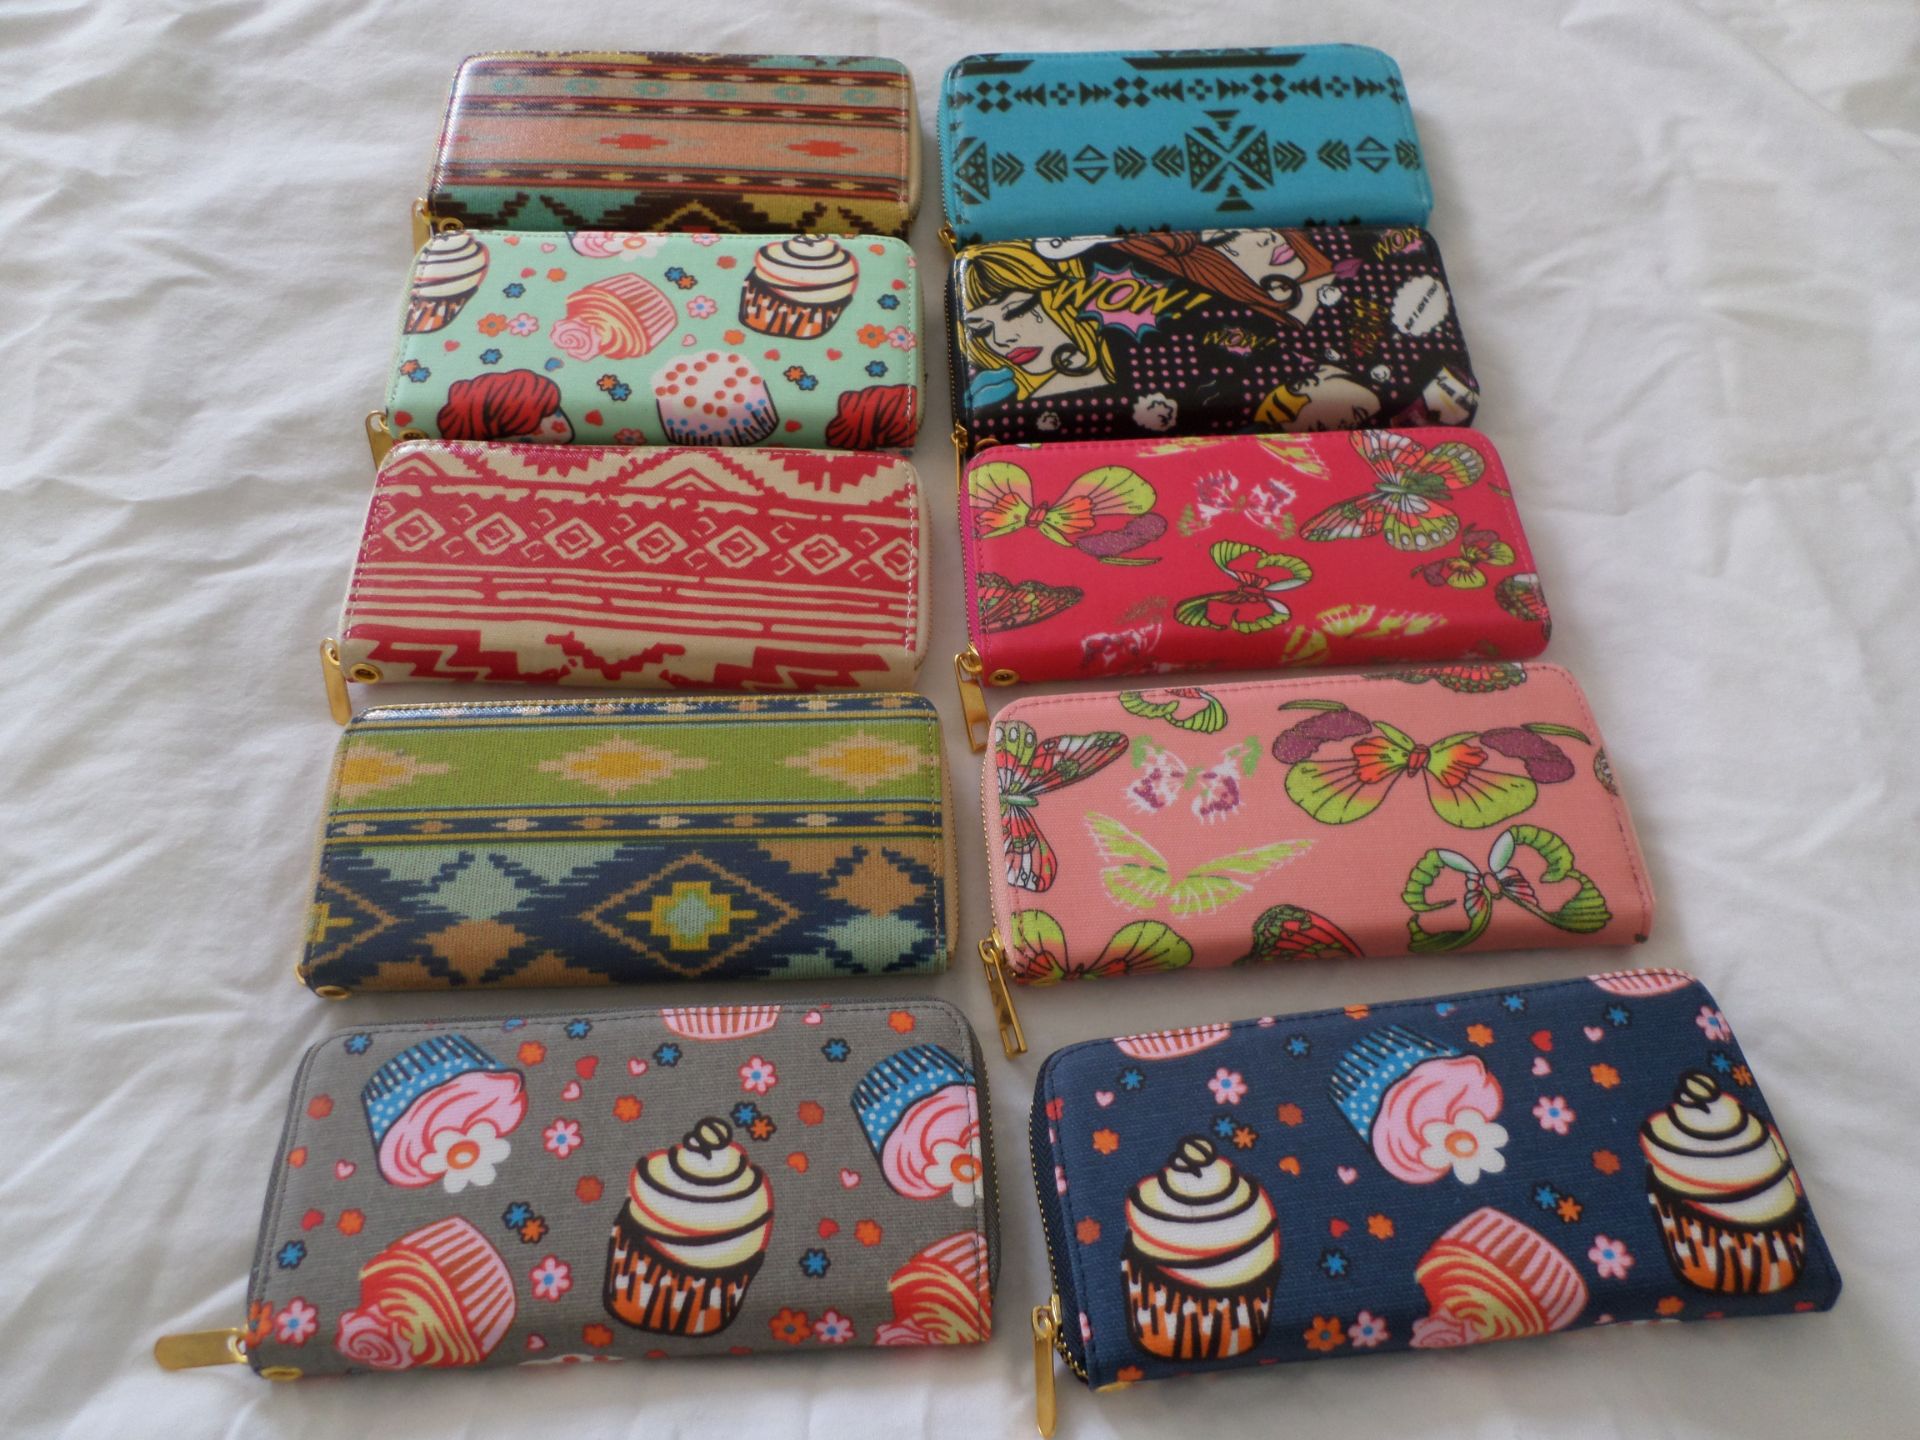 20 x Ladies Clutch/Purses RRP £14 Each. Brand New - Image 2 of 4